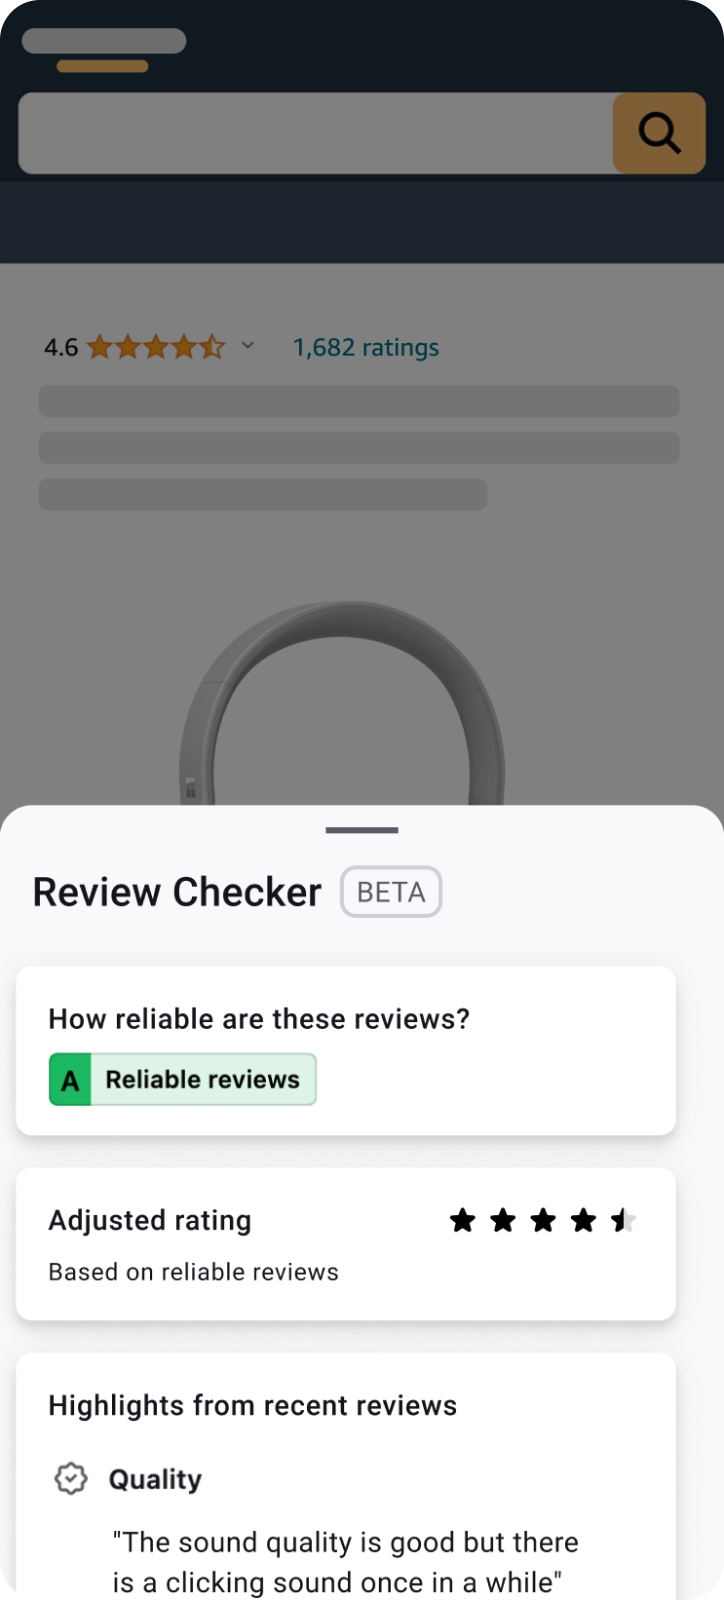 Earphones with 4.6 stars from 1,682 ratings got Adjusted Rating by Review Checker of 4.5 stars with Fakespot Review Grade of A (Reliable Reviews) as shown by the Review Checker Beta sidebar